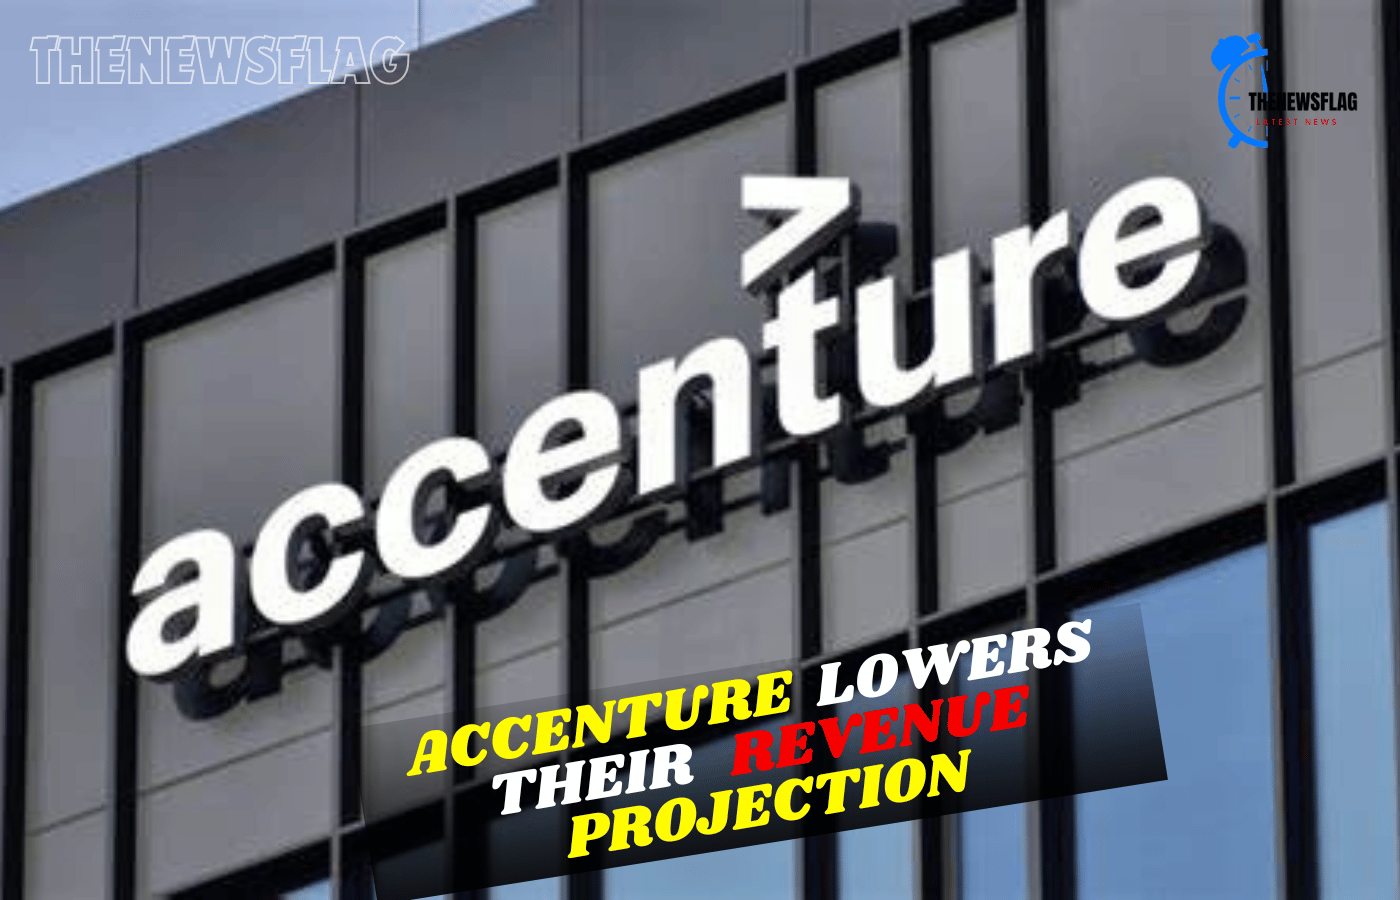 Accenture lowers their revenue projection, indicating a slowing consultancy market.